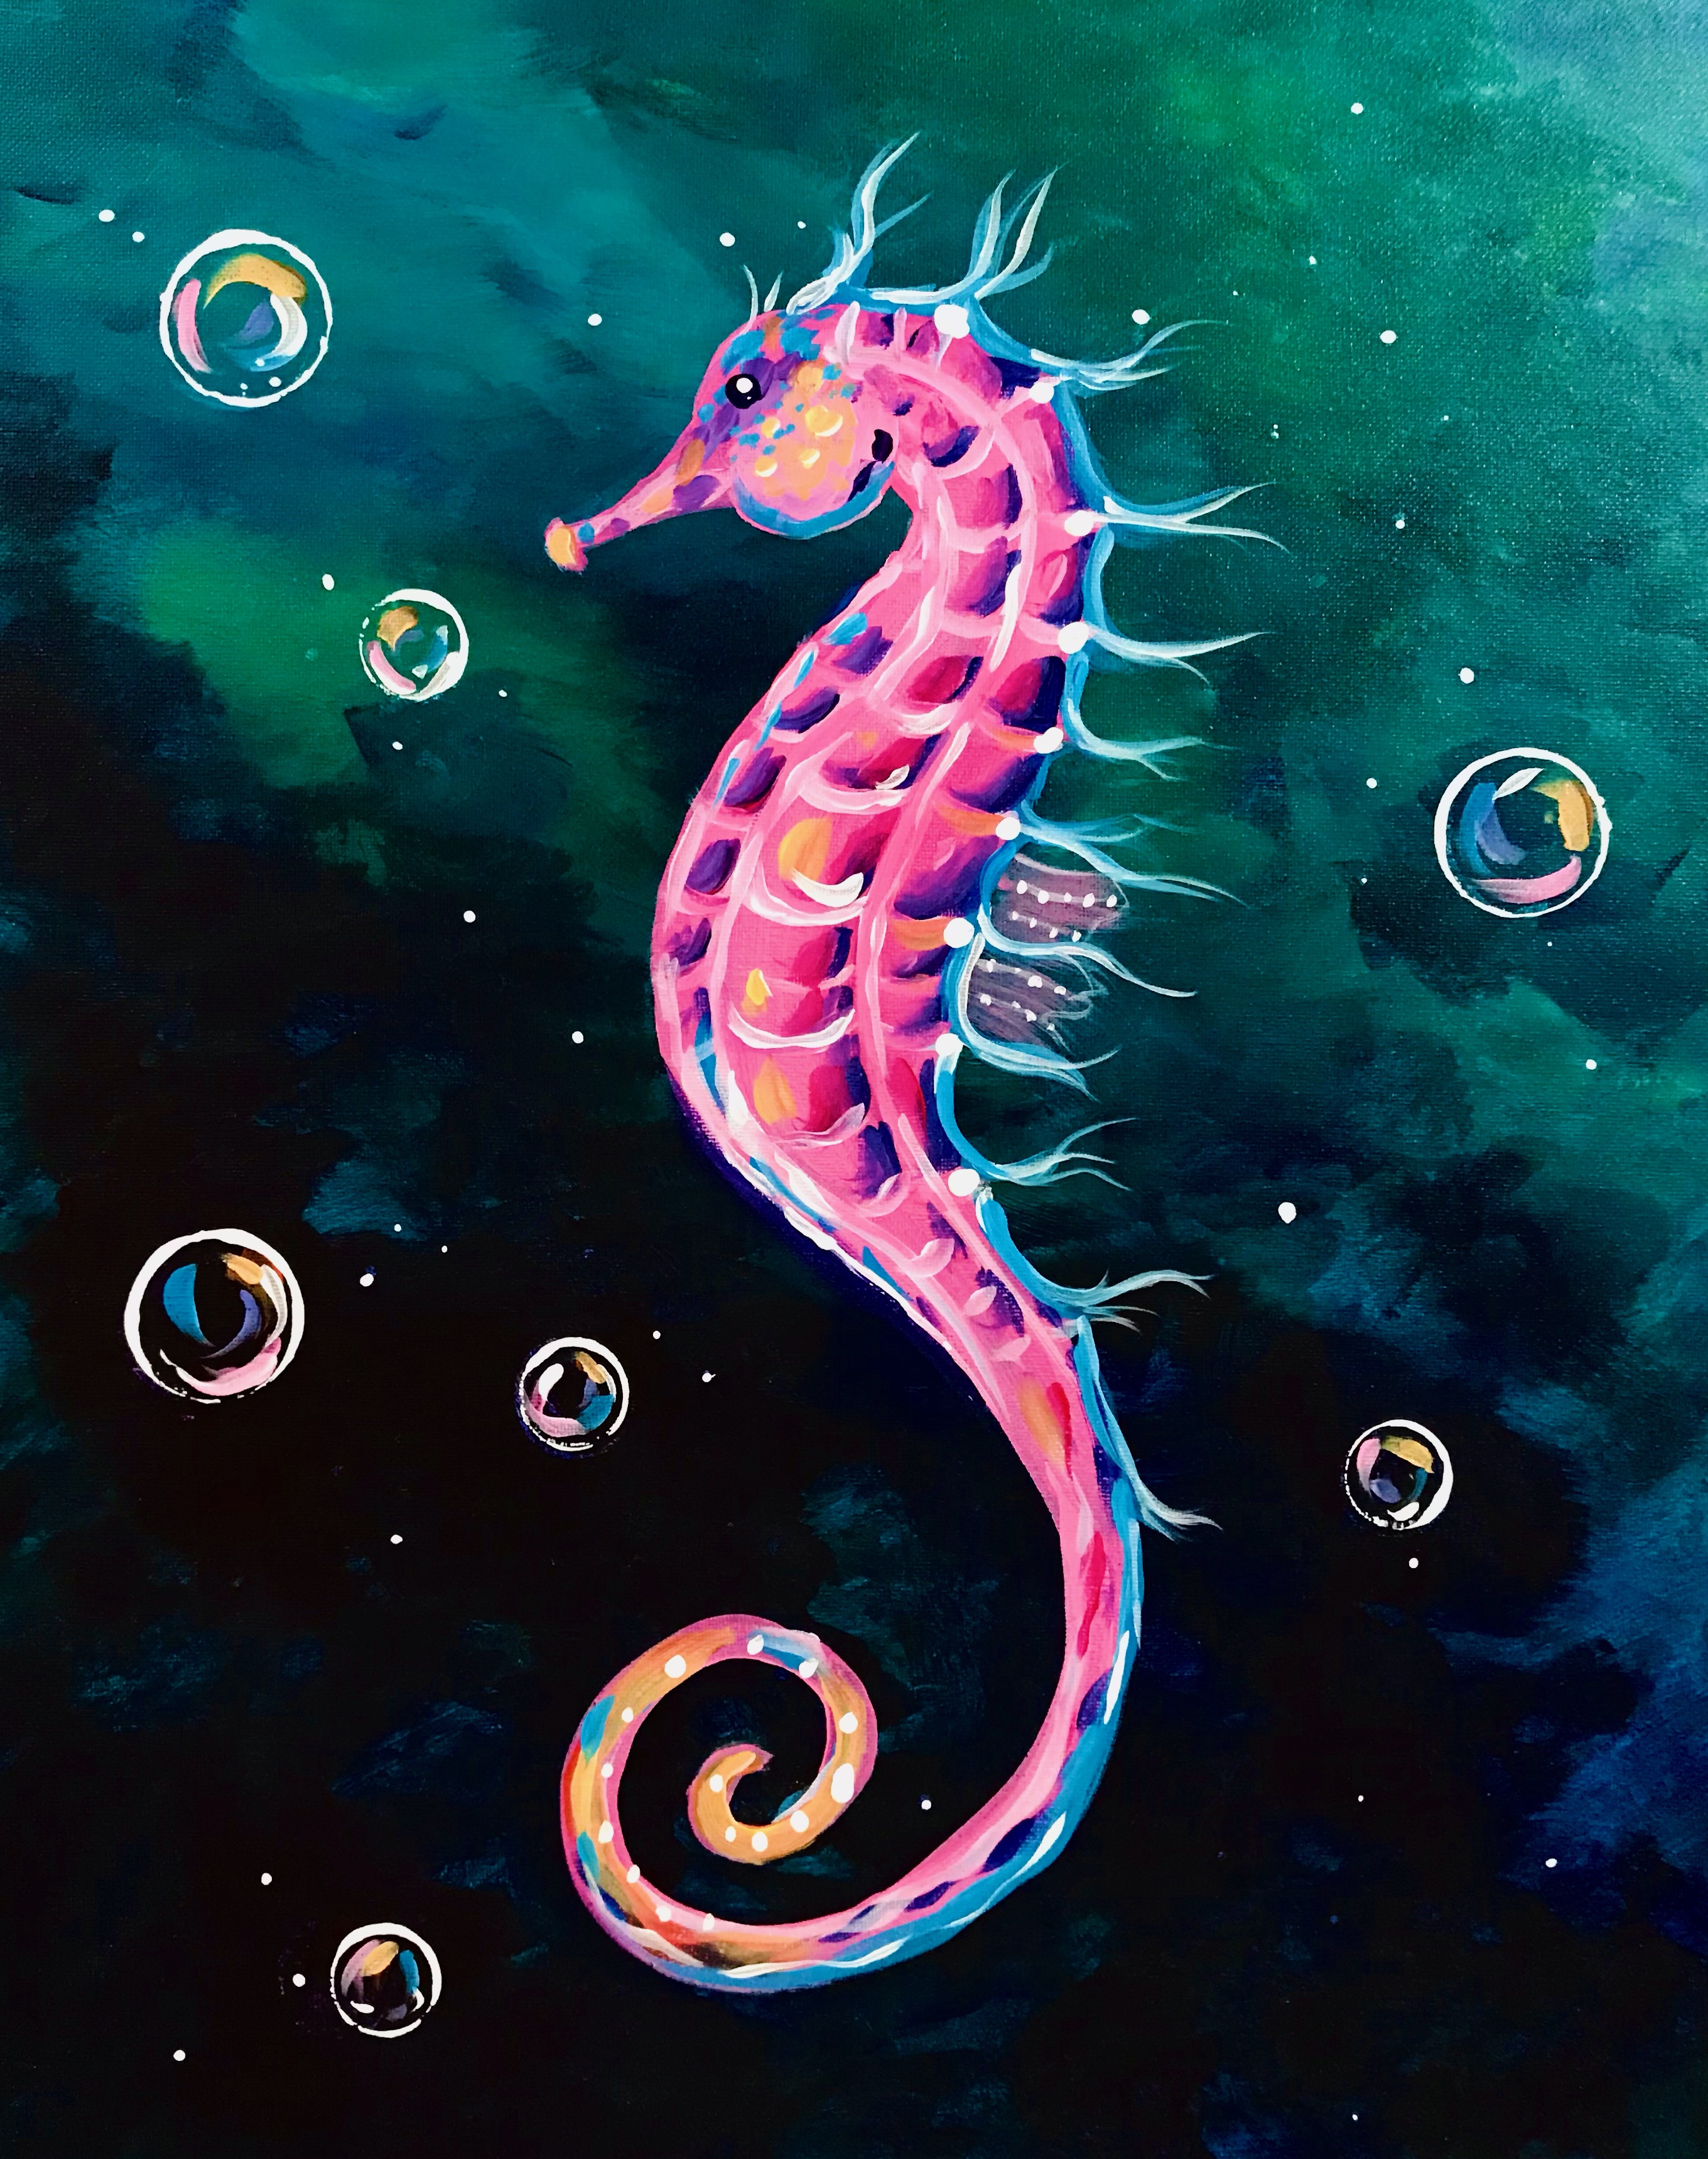 A Seahorse Empress experience project by Yaymaker